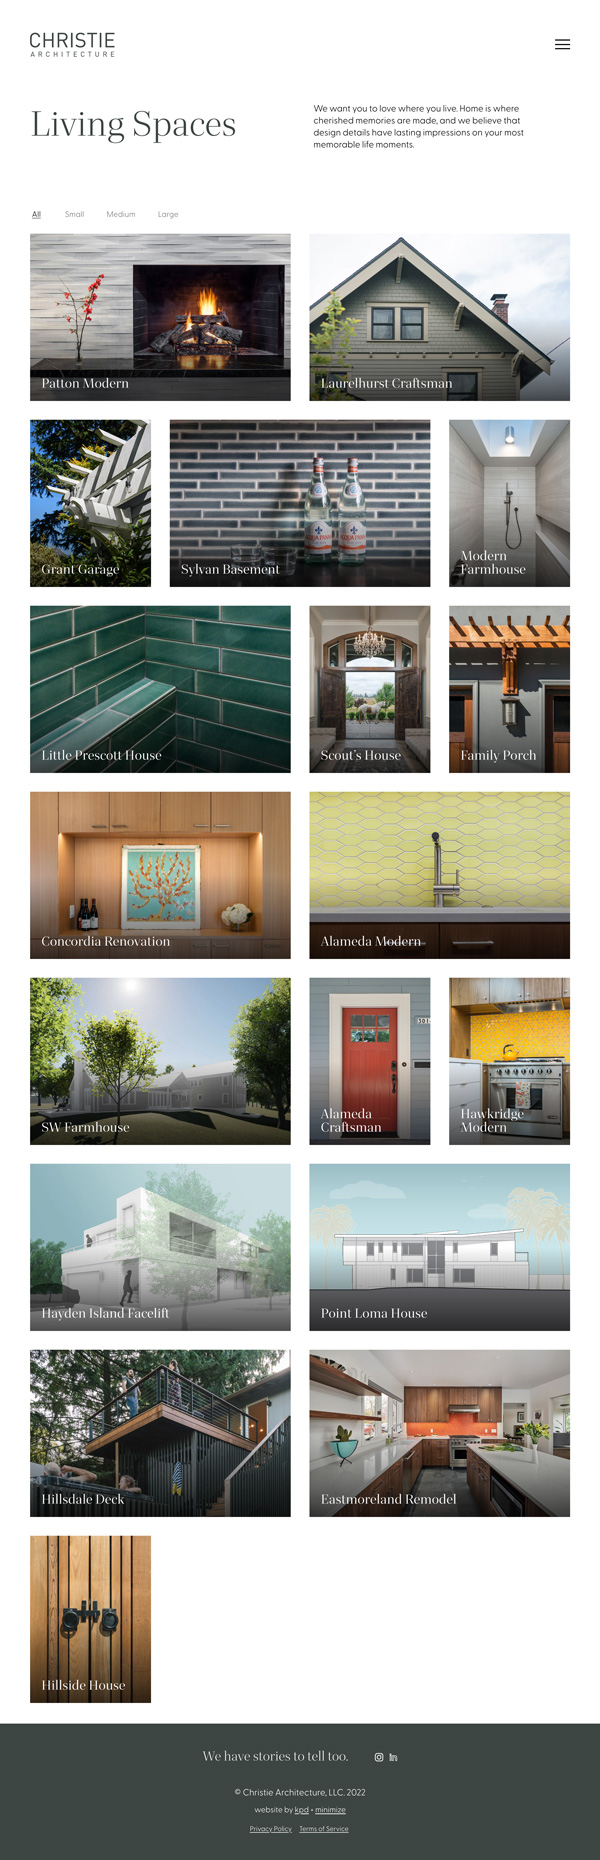 Christie Architecture website projects page full length